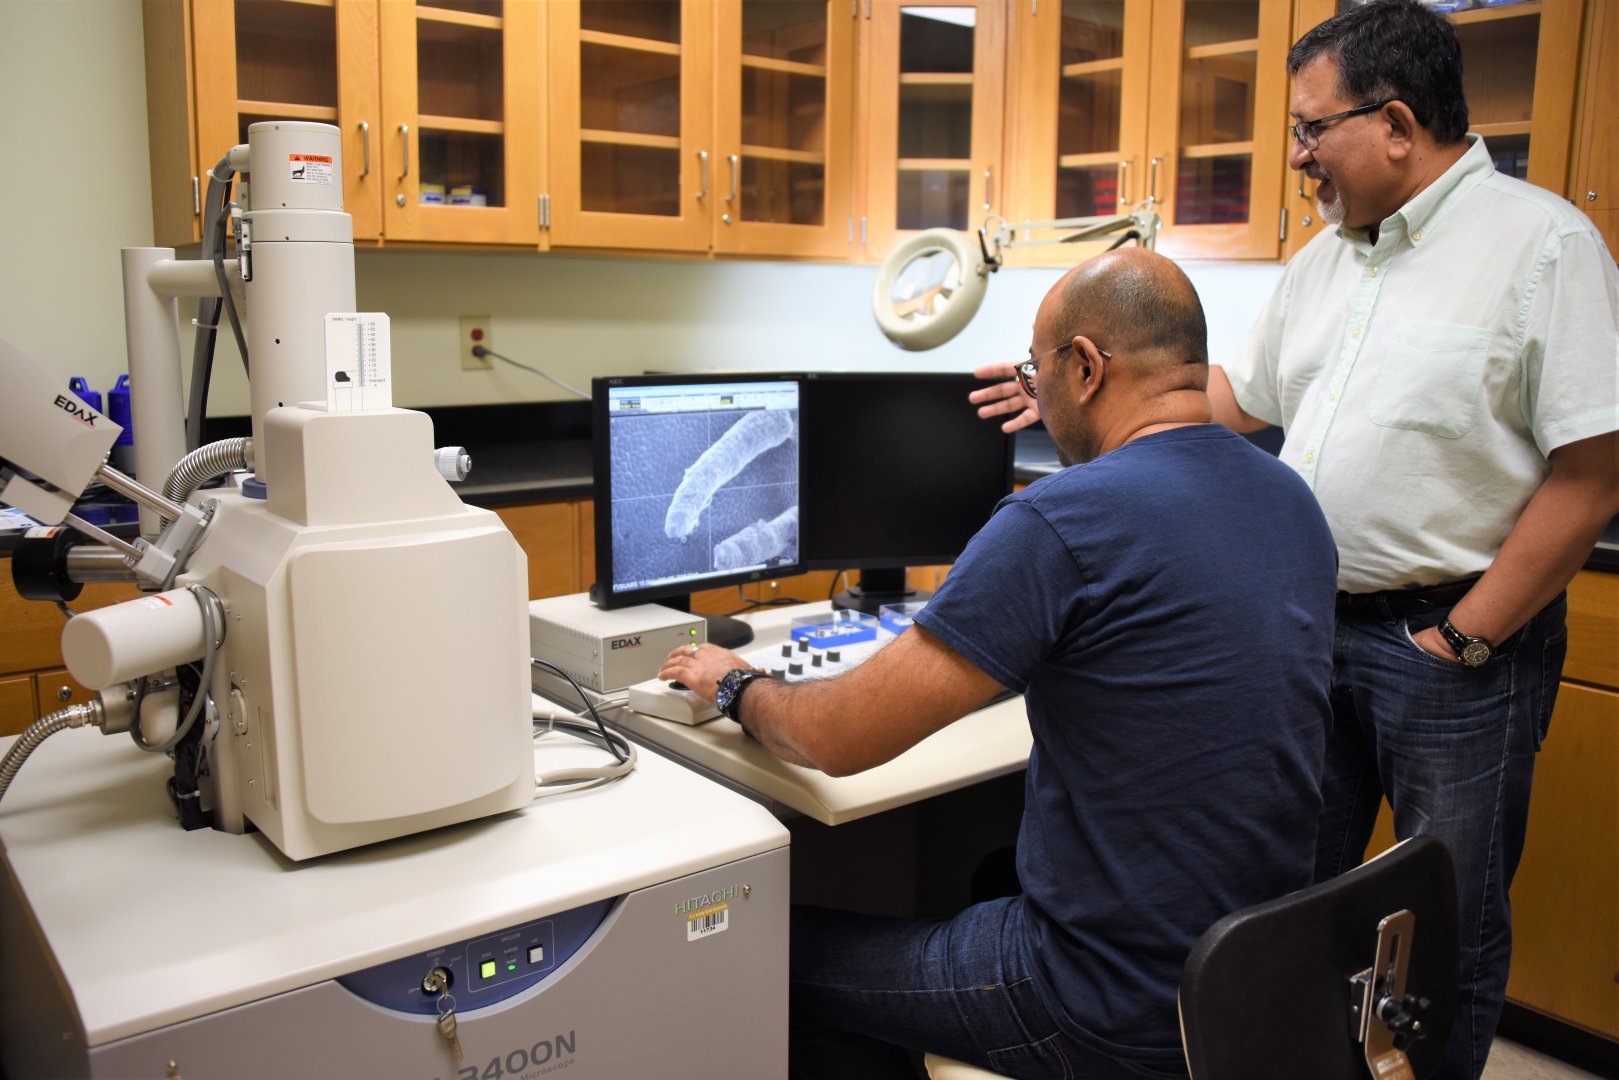 Dr. Nirmal Joshee (standing), a Fort Valley State University plant science professor, and Brajesh Vaidya (sitting), a FVSU research assistant, examine an Aronia leaf using a Hitachi scanning electron microscope.